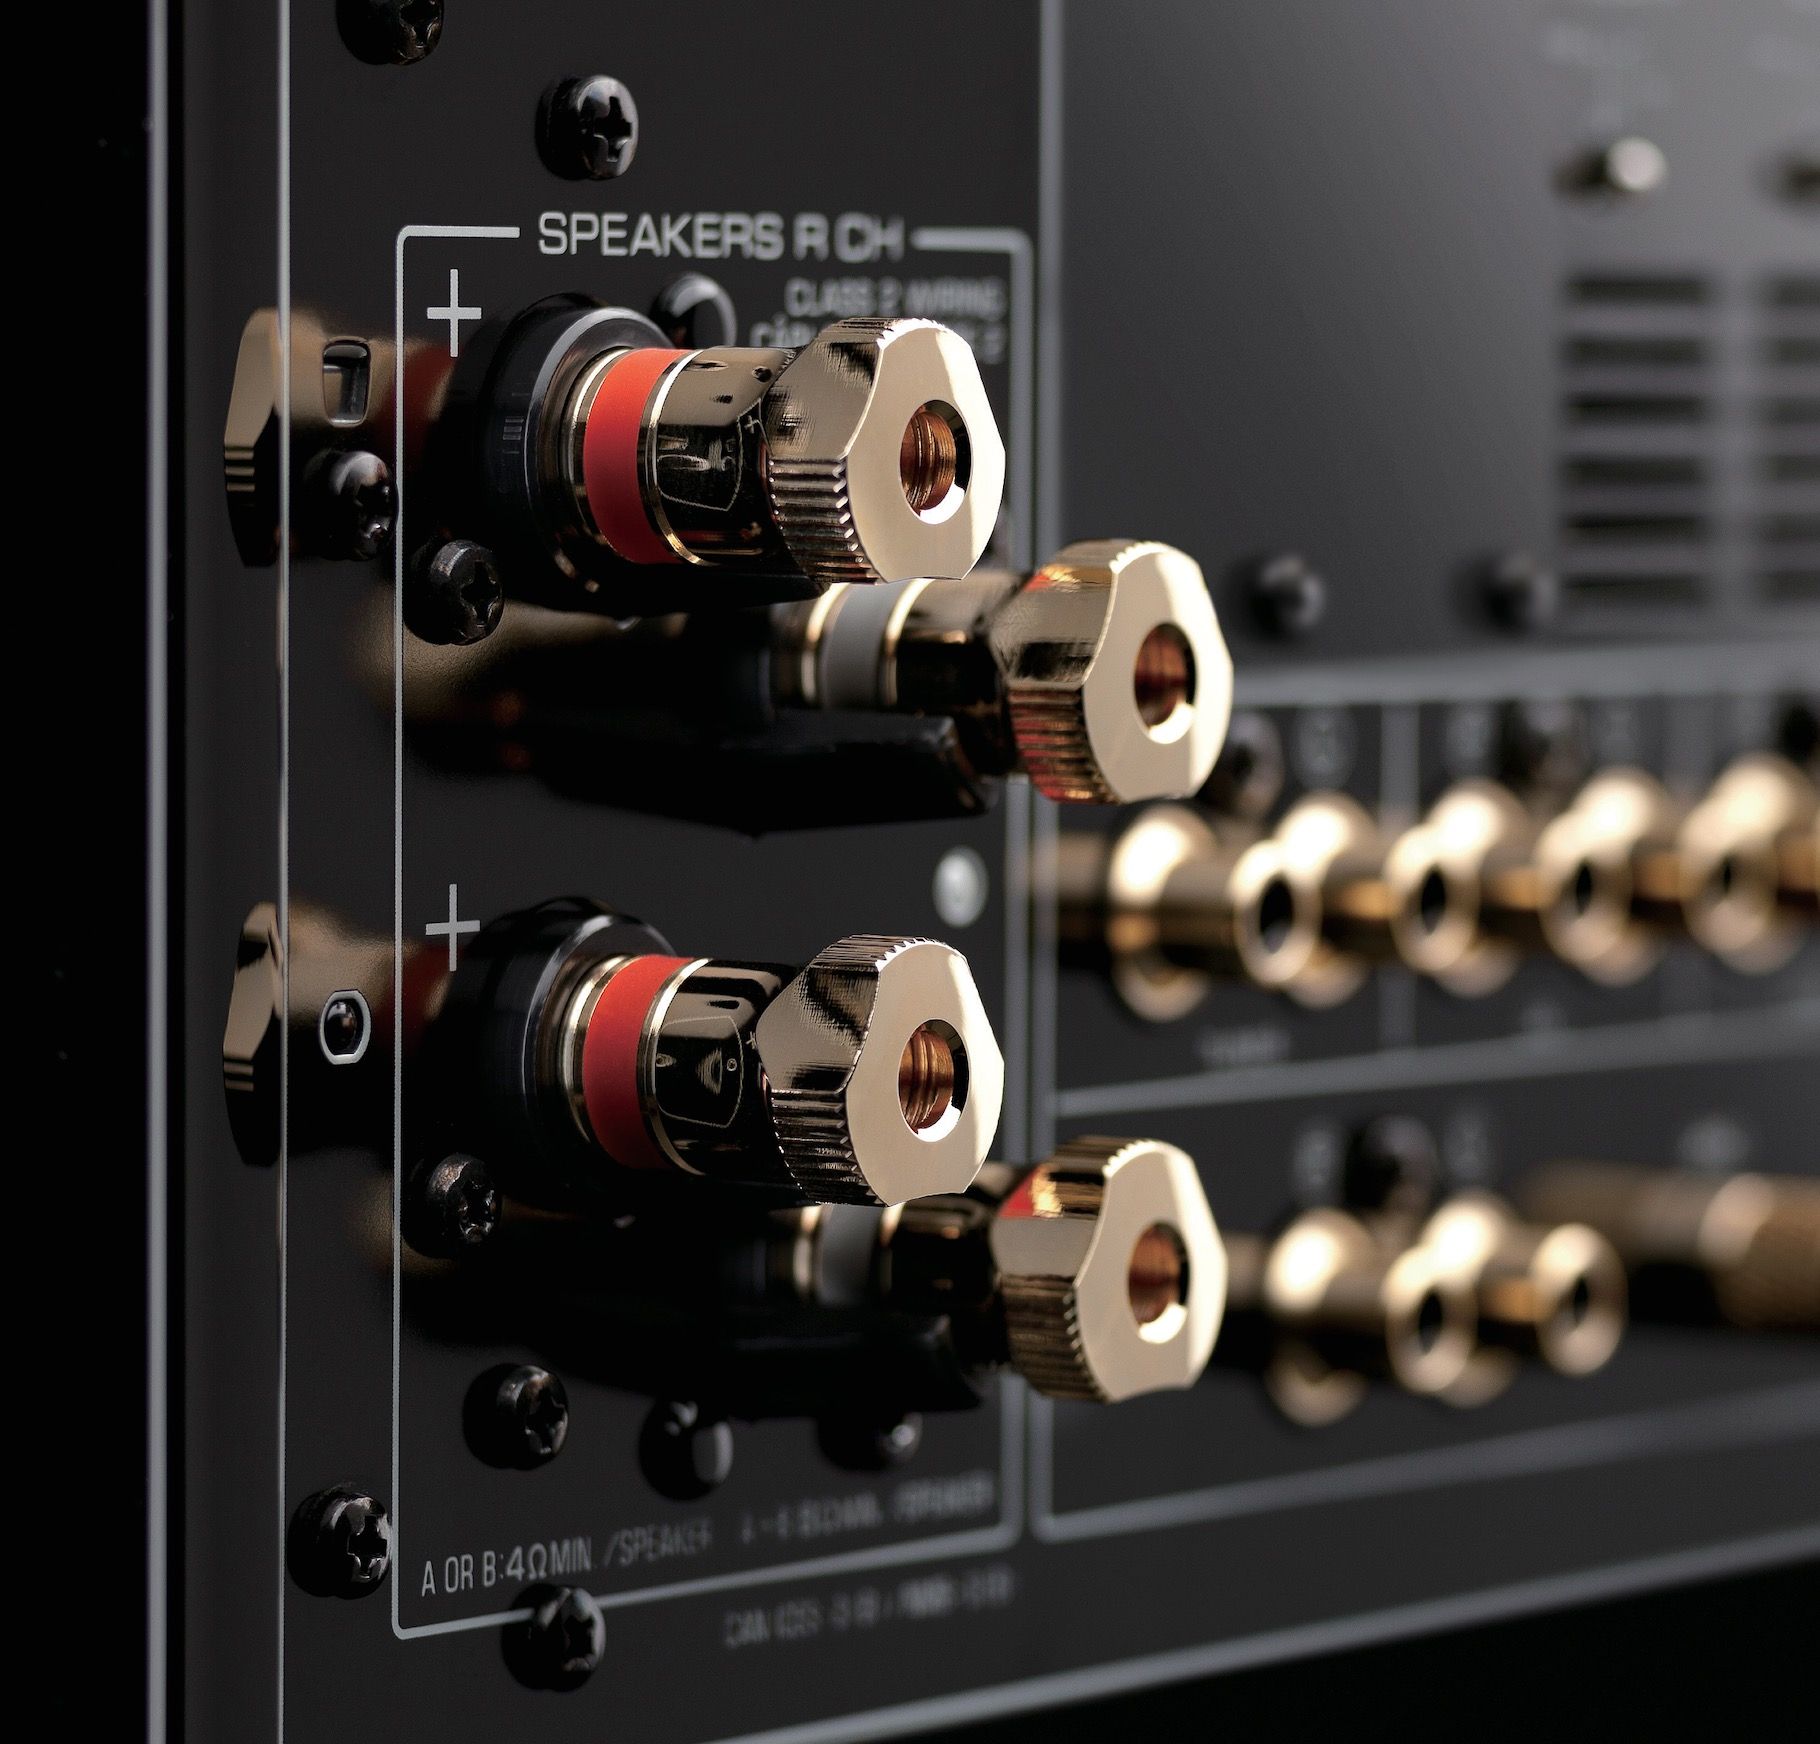 A-S1200 Integrated Amplifier From Yamaha